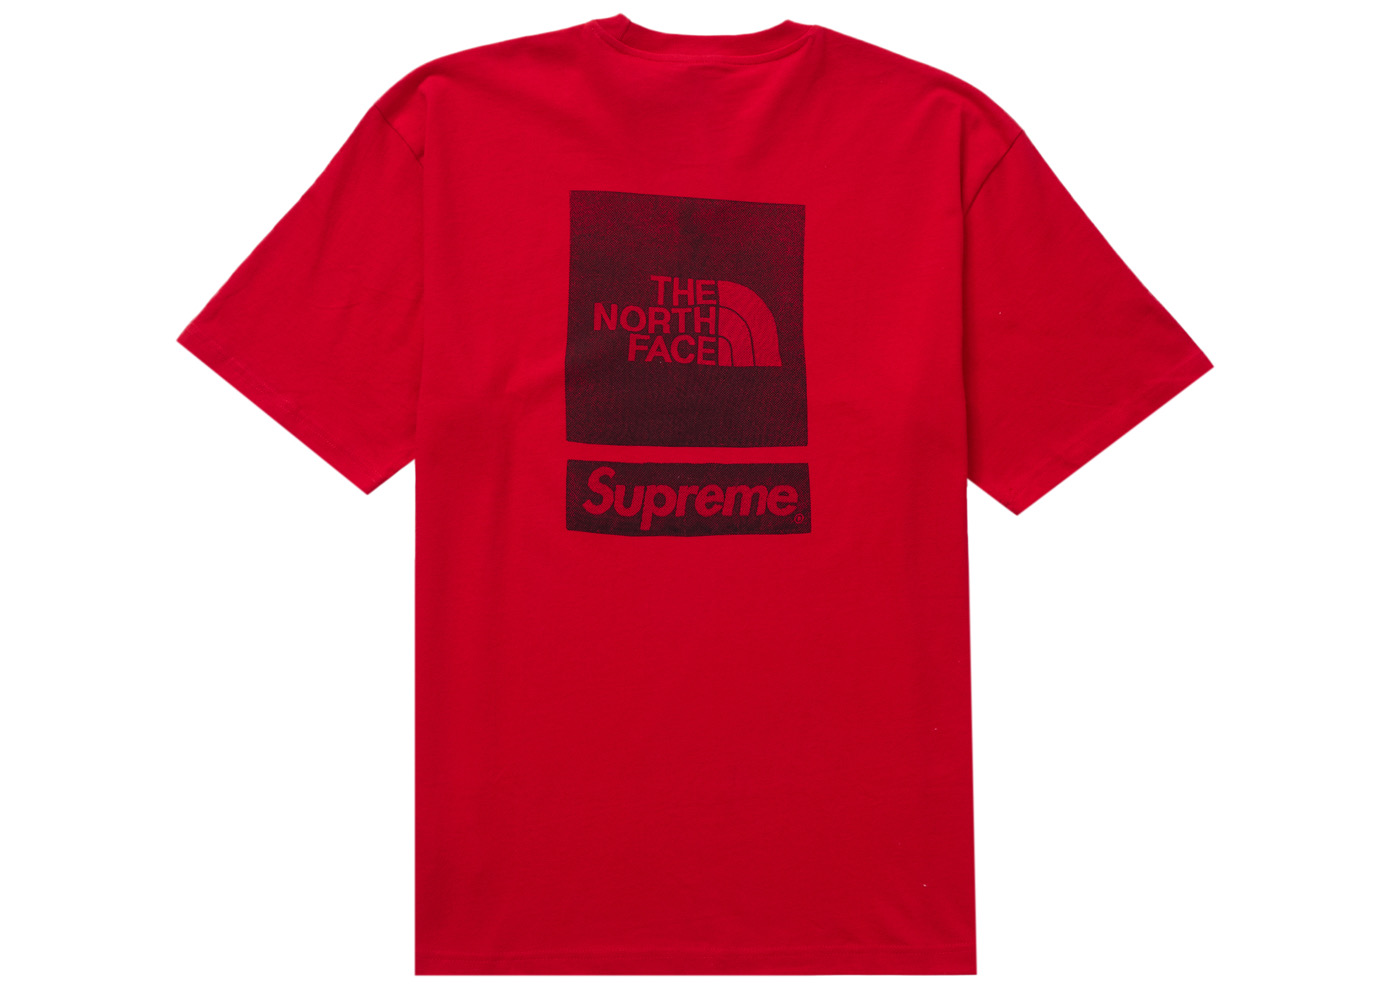 Supreme x The North Face S/S Top \